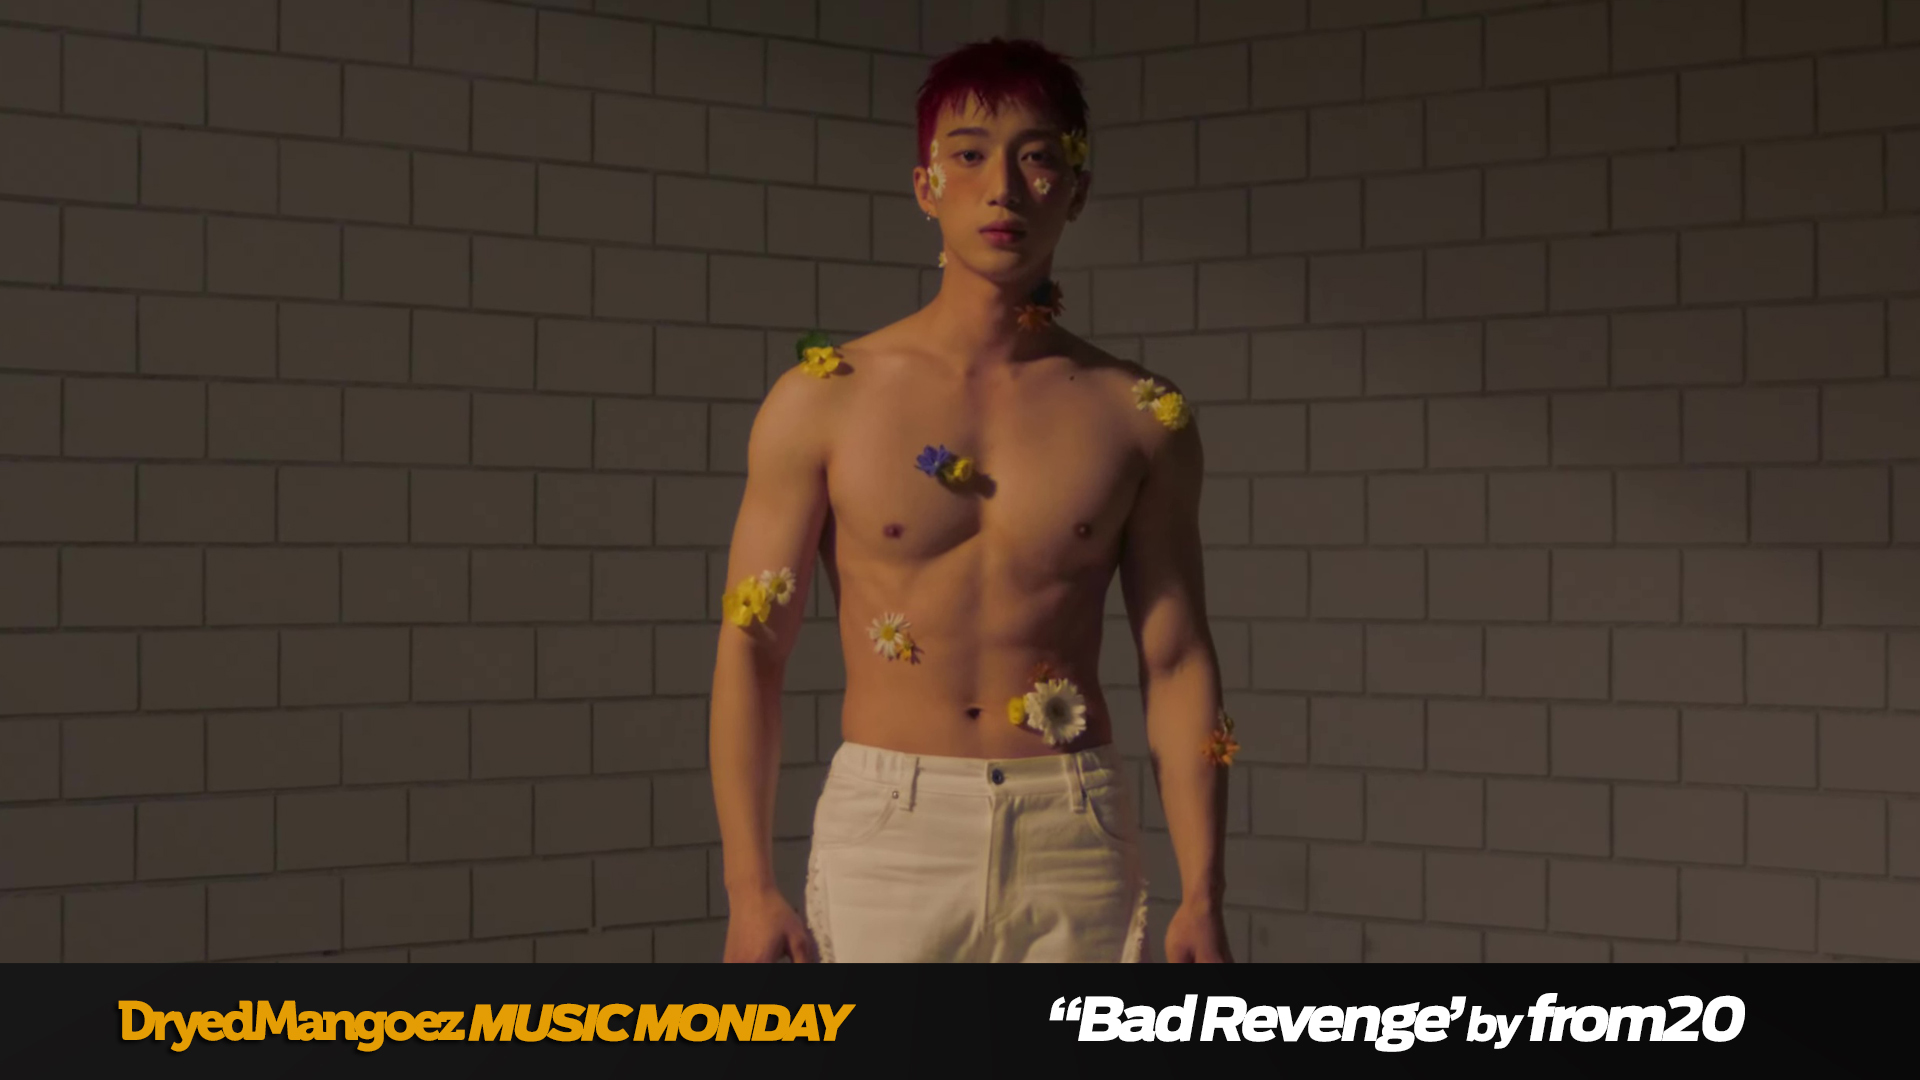 Music Monday, April 10, 2023 – “Bad Revenge” by from20